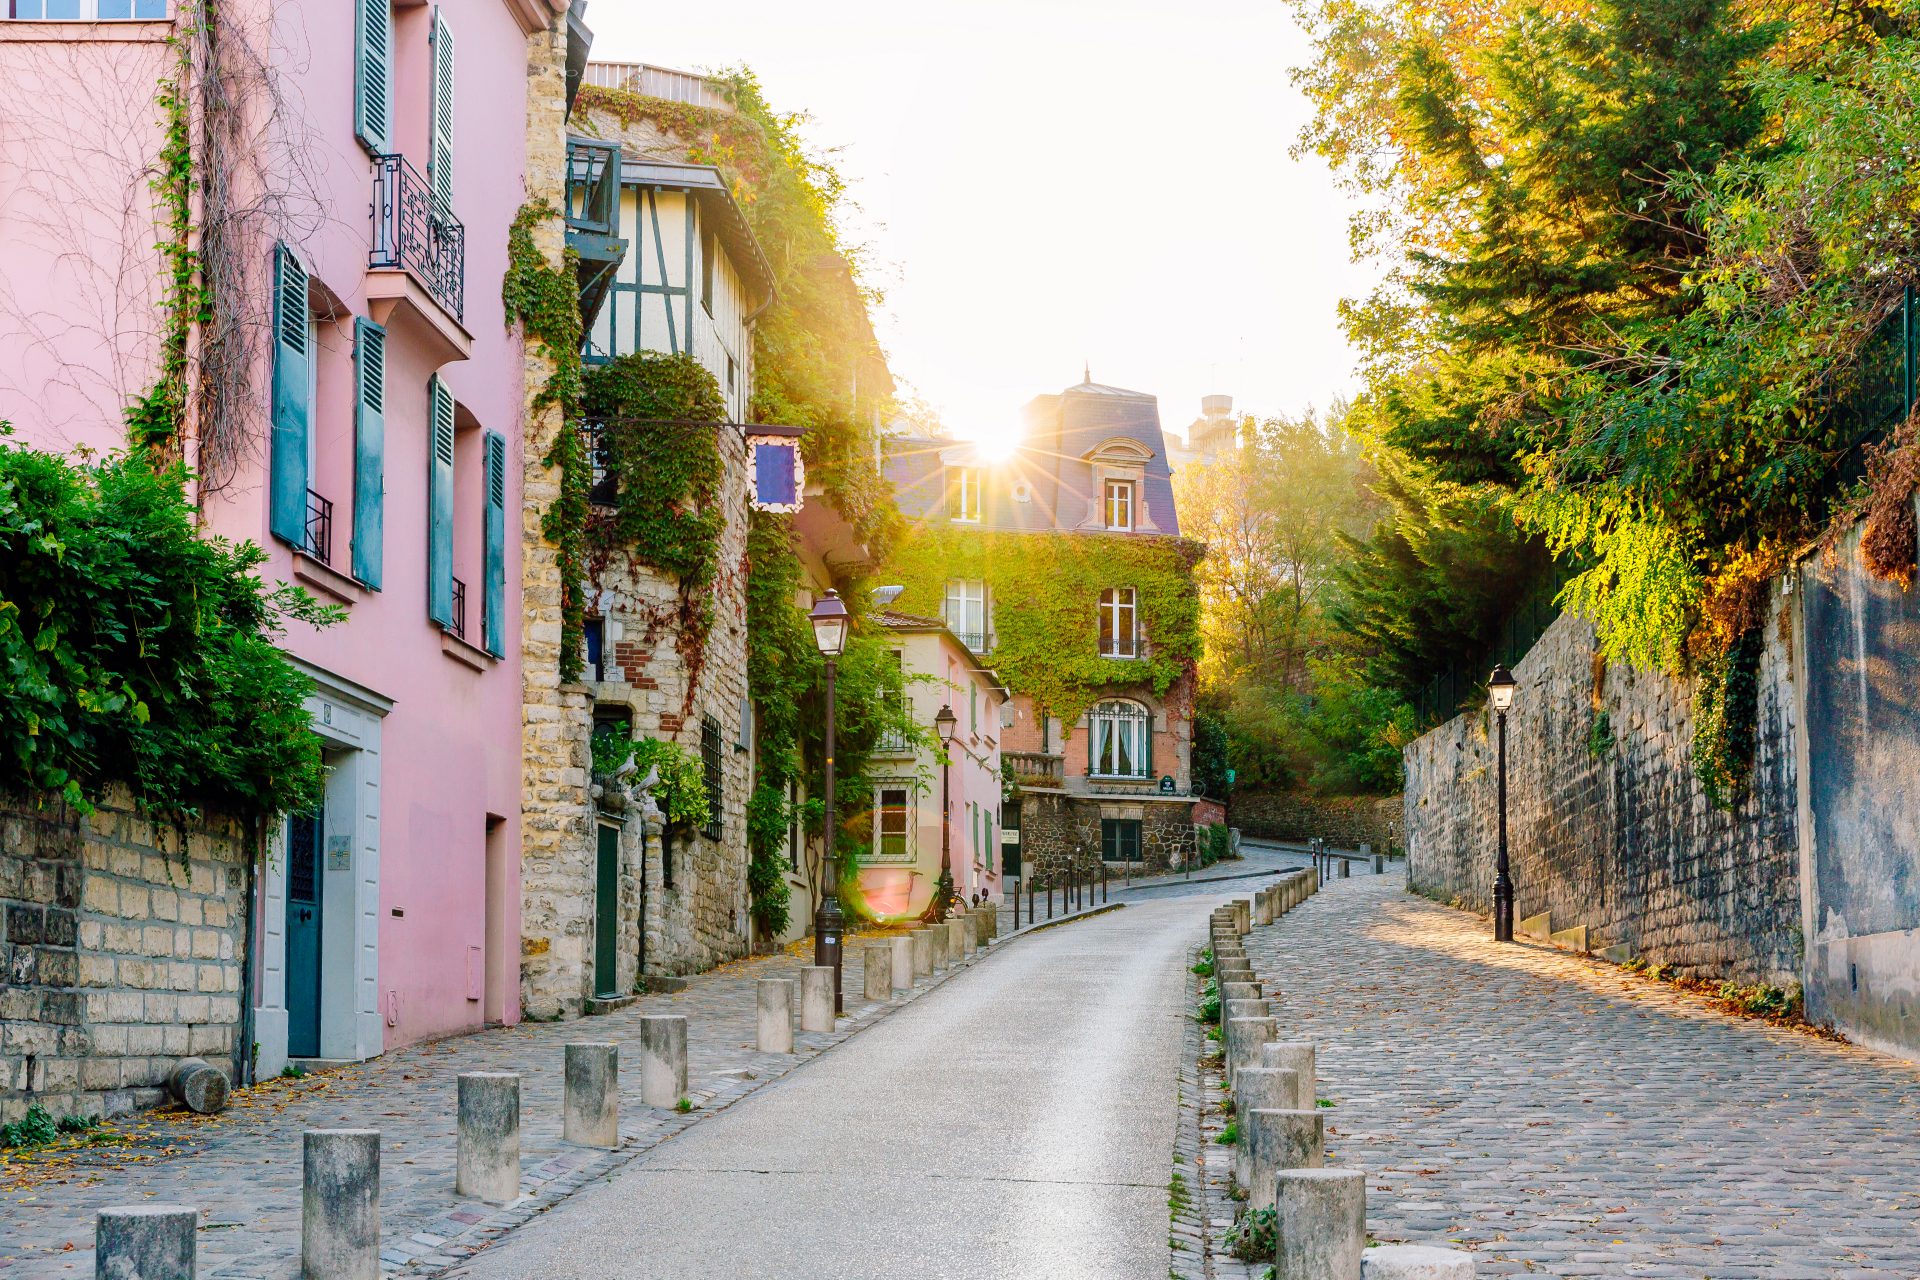 <p>Synonymous with Paris' bohemian and artistic life, Montmartre is a must-visit area on our romantic tour. Its winding, flower-lined streets, cozy restaurants and cafes, and friendly atmosphere will enchant you, reminding you of scenes from the movie 'Amélie' (2001).</p>